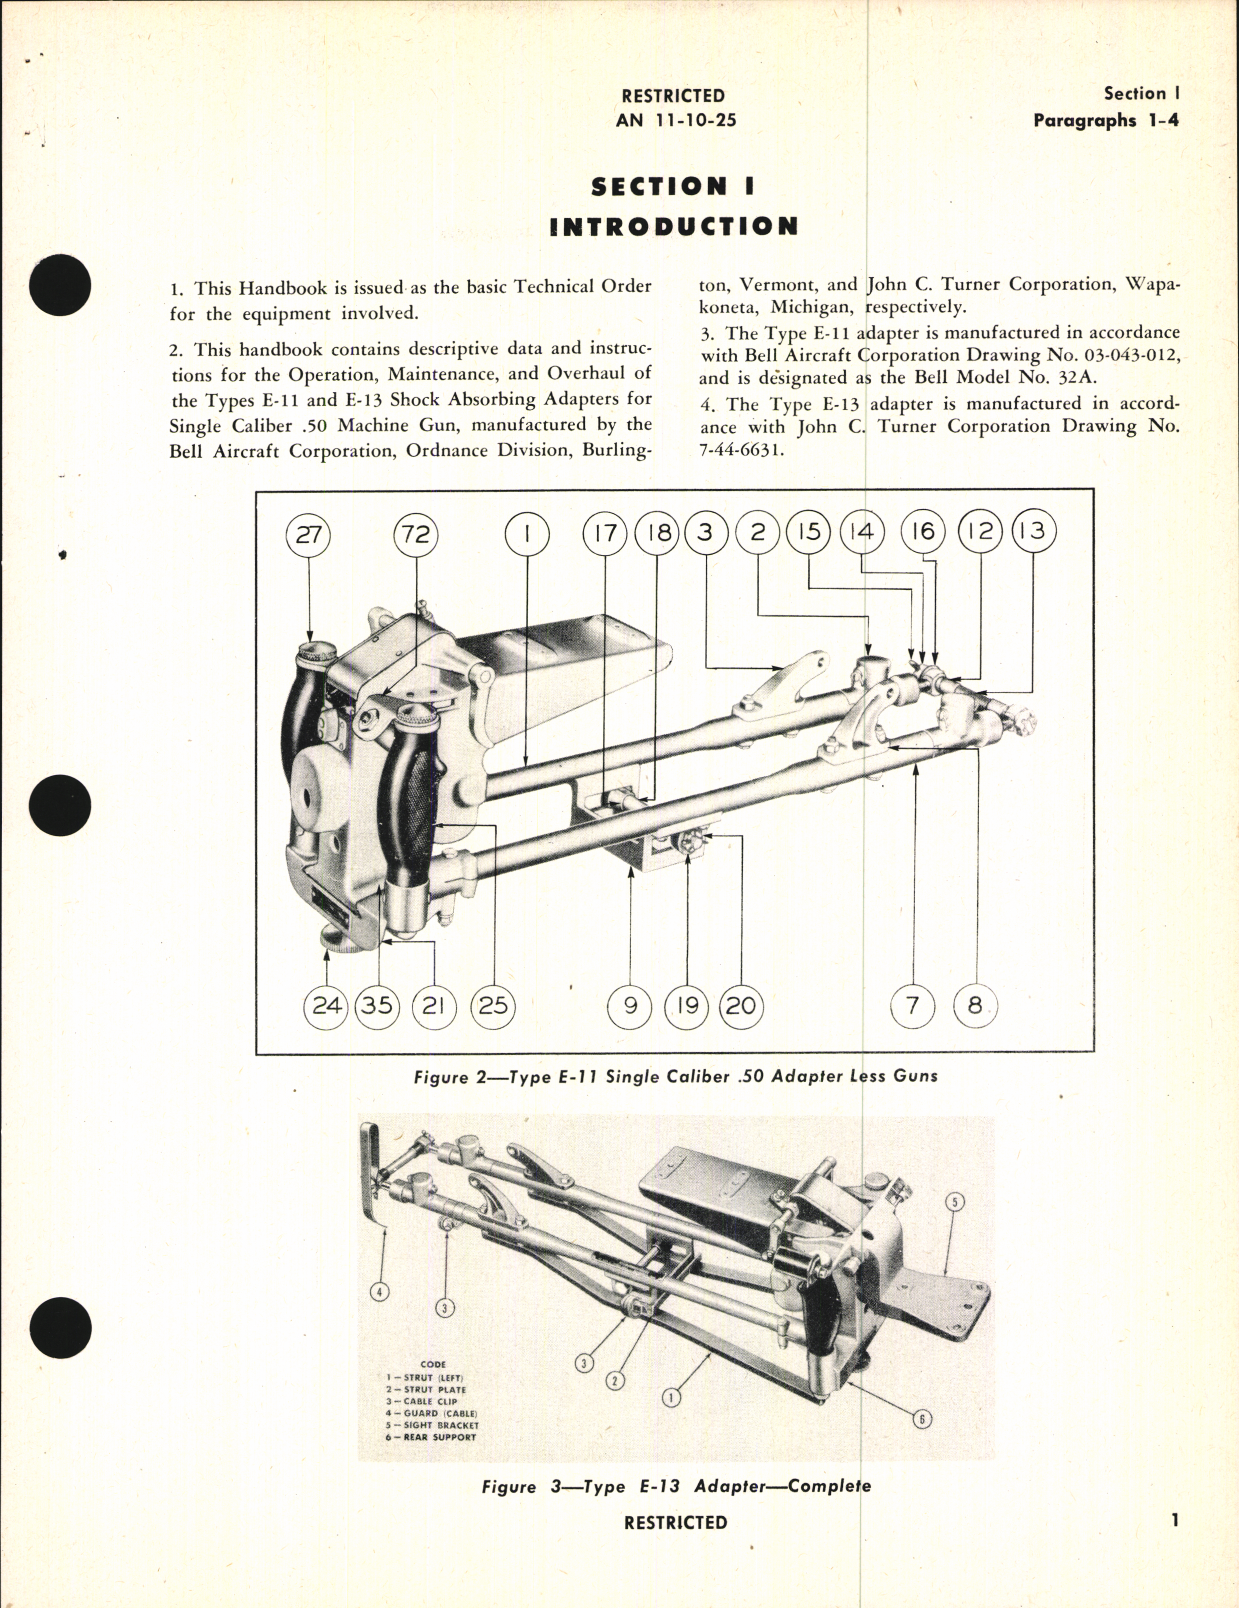 Sample page 5 from AirCorps Library document: Handbook of Instructions with Parts Catalog for Single Adapters for Caliber .50 Machine Guns